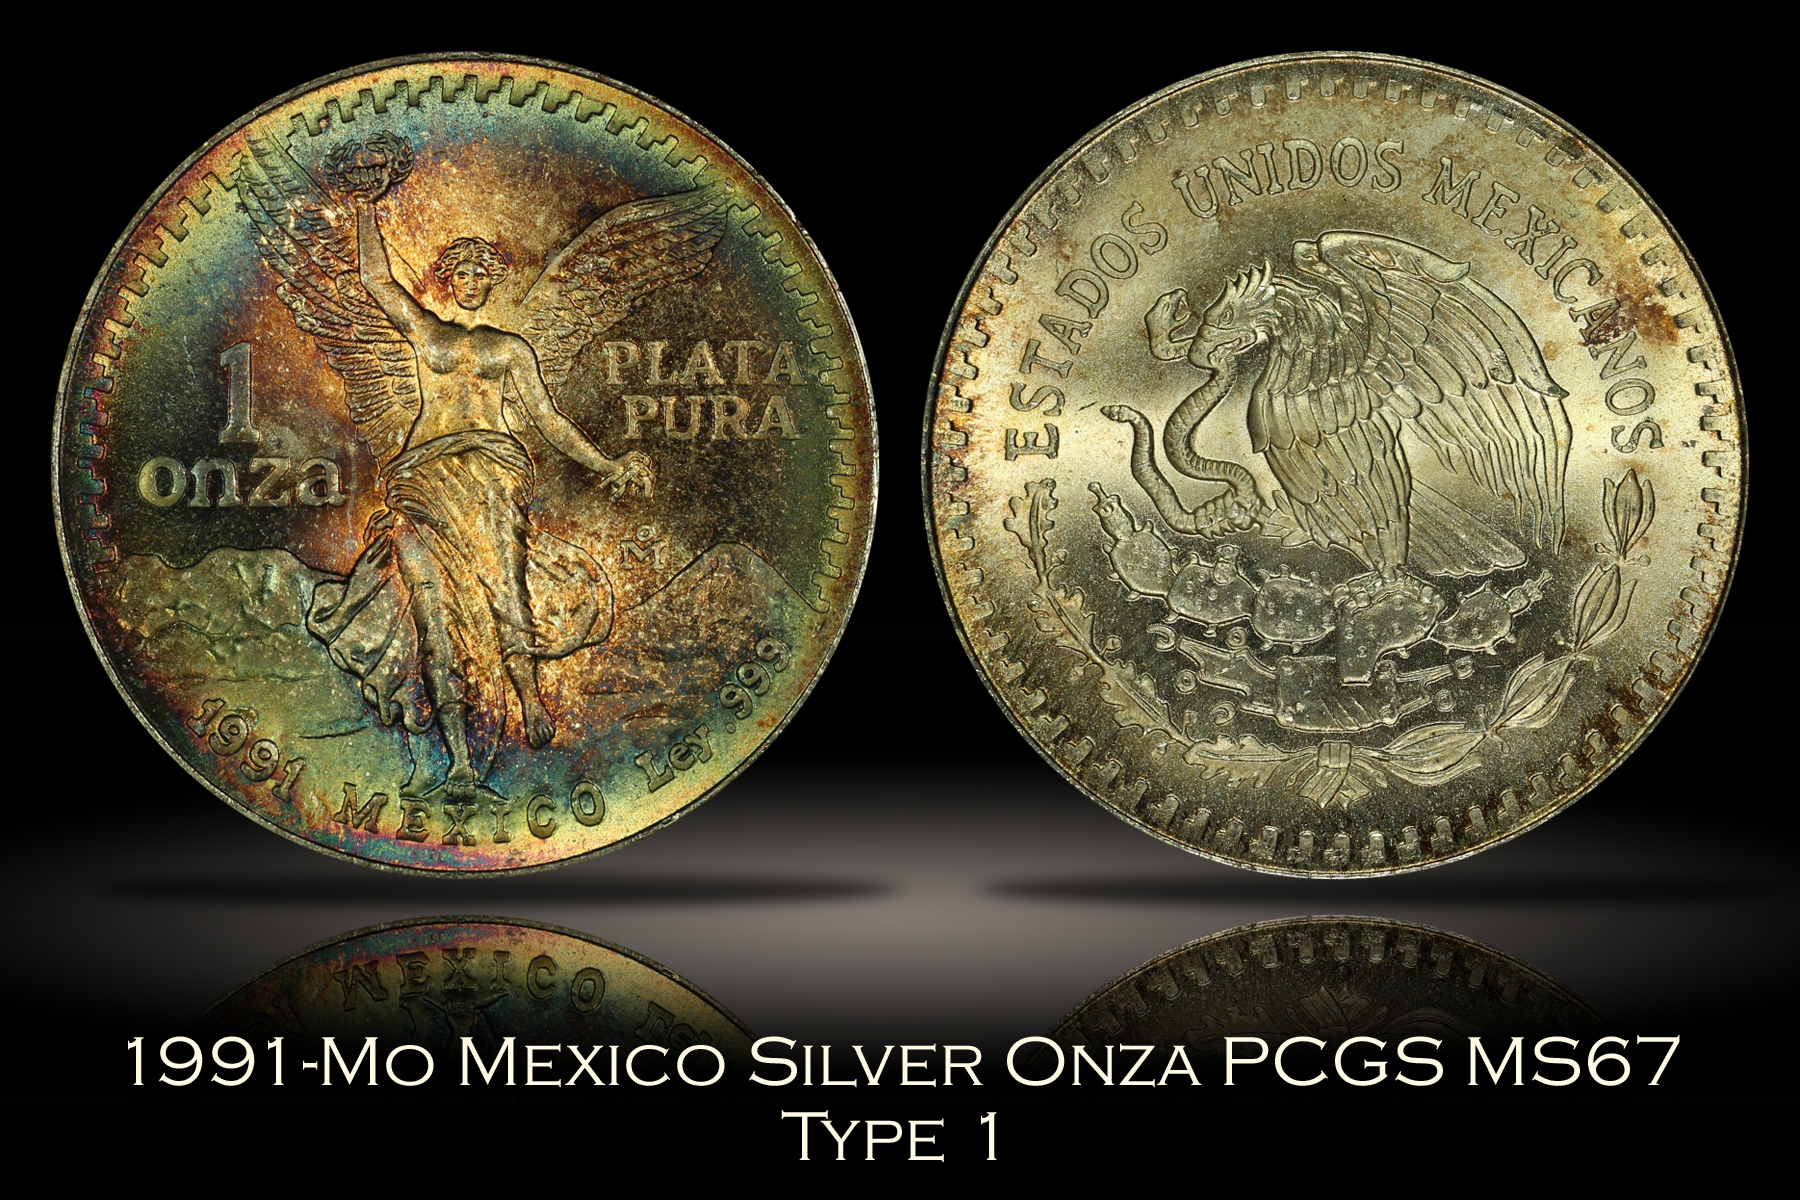 1991-Mo Mexico Type 1 Silver Onza PCGS MS67